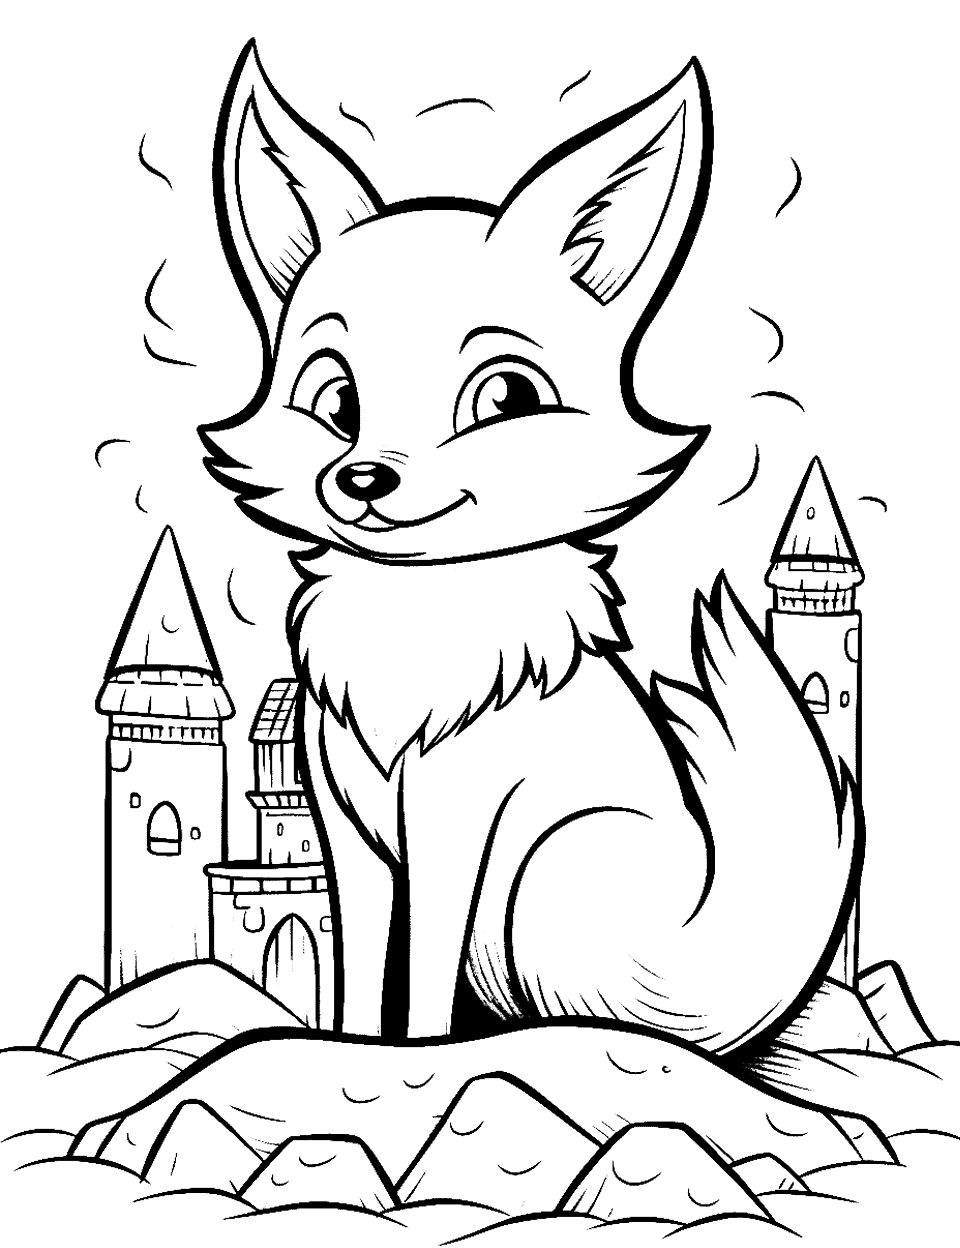 Fox's Sandcastle Kingdom Fox Coloring Page - At the beach, a fox proudly shows off its elaborate sandcastle.